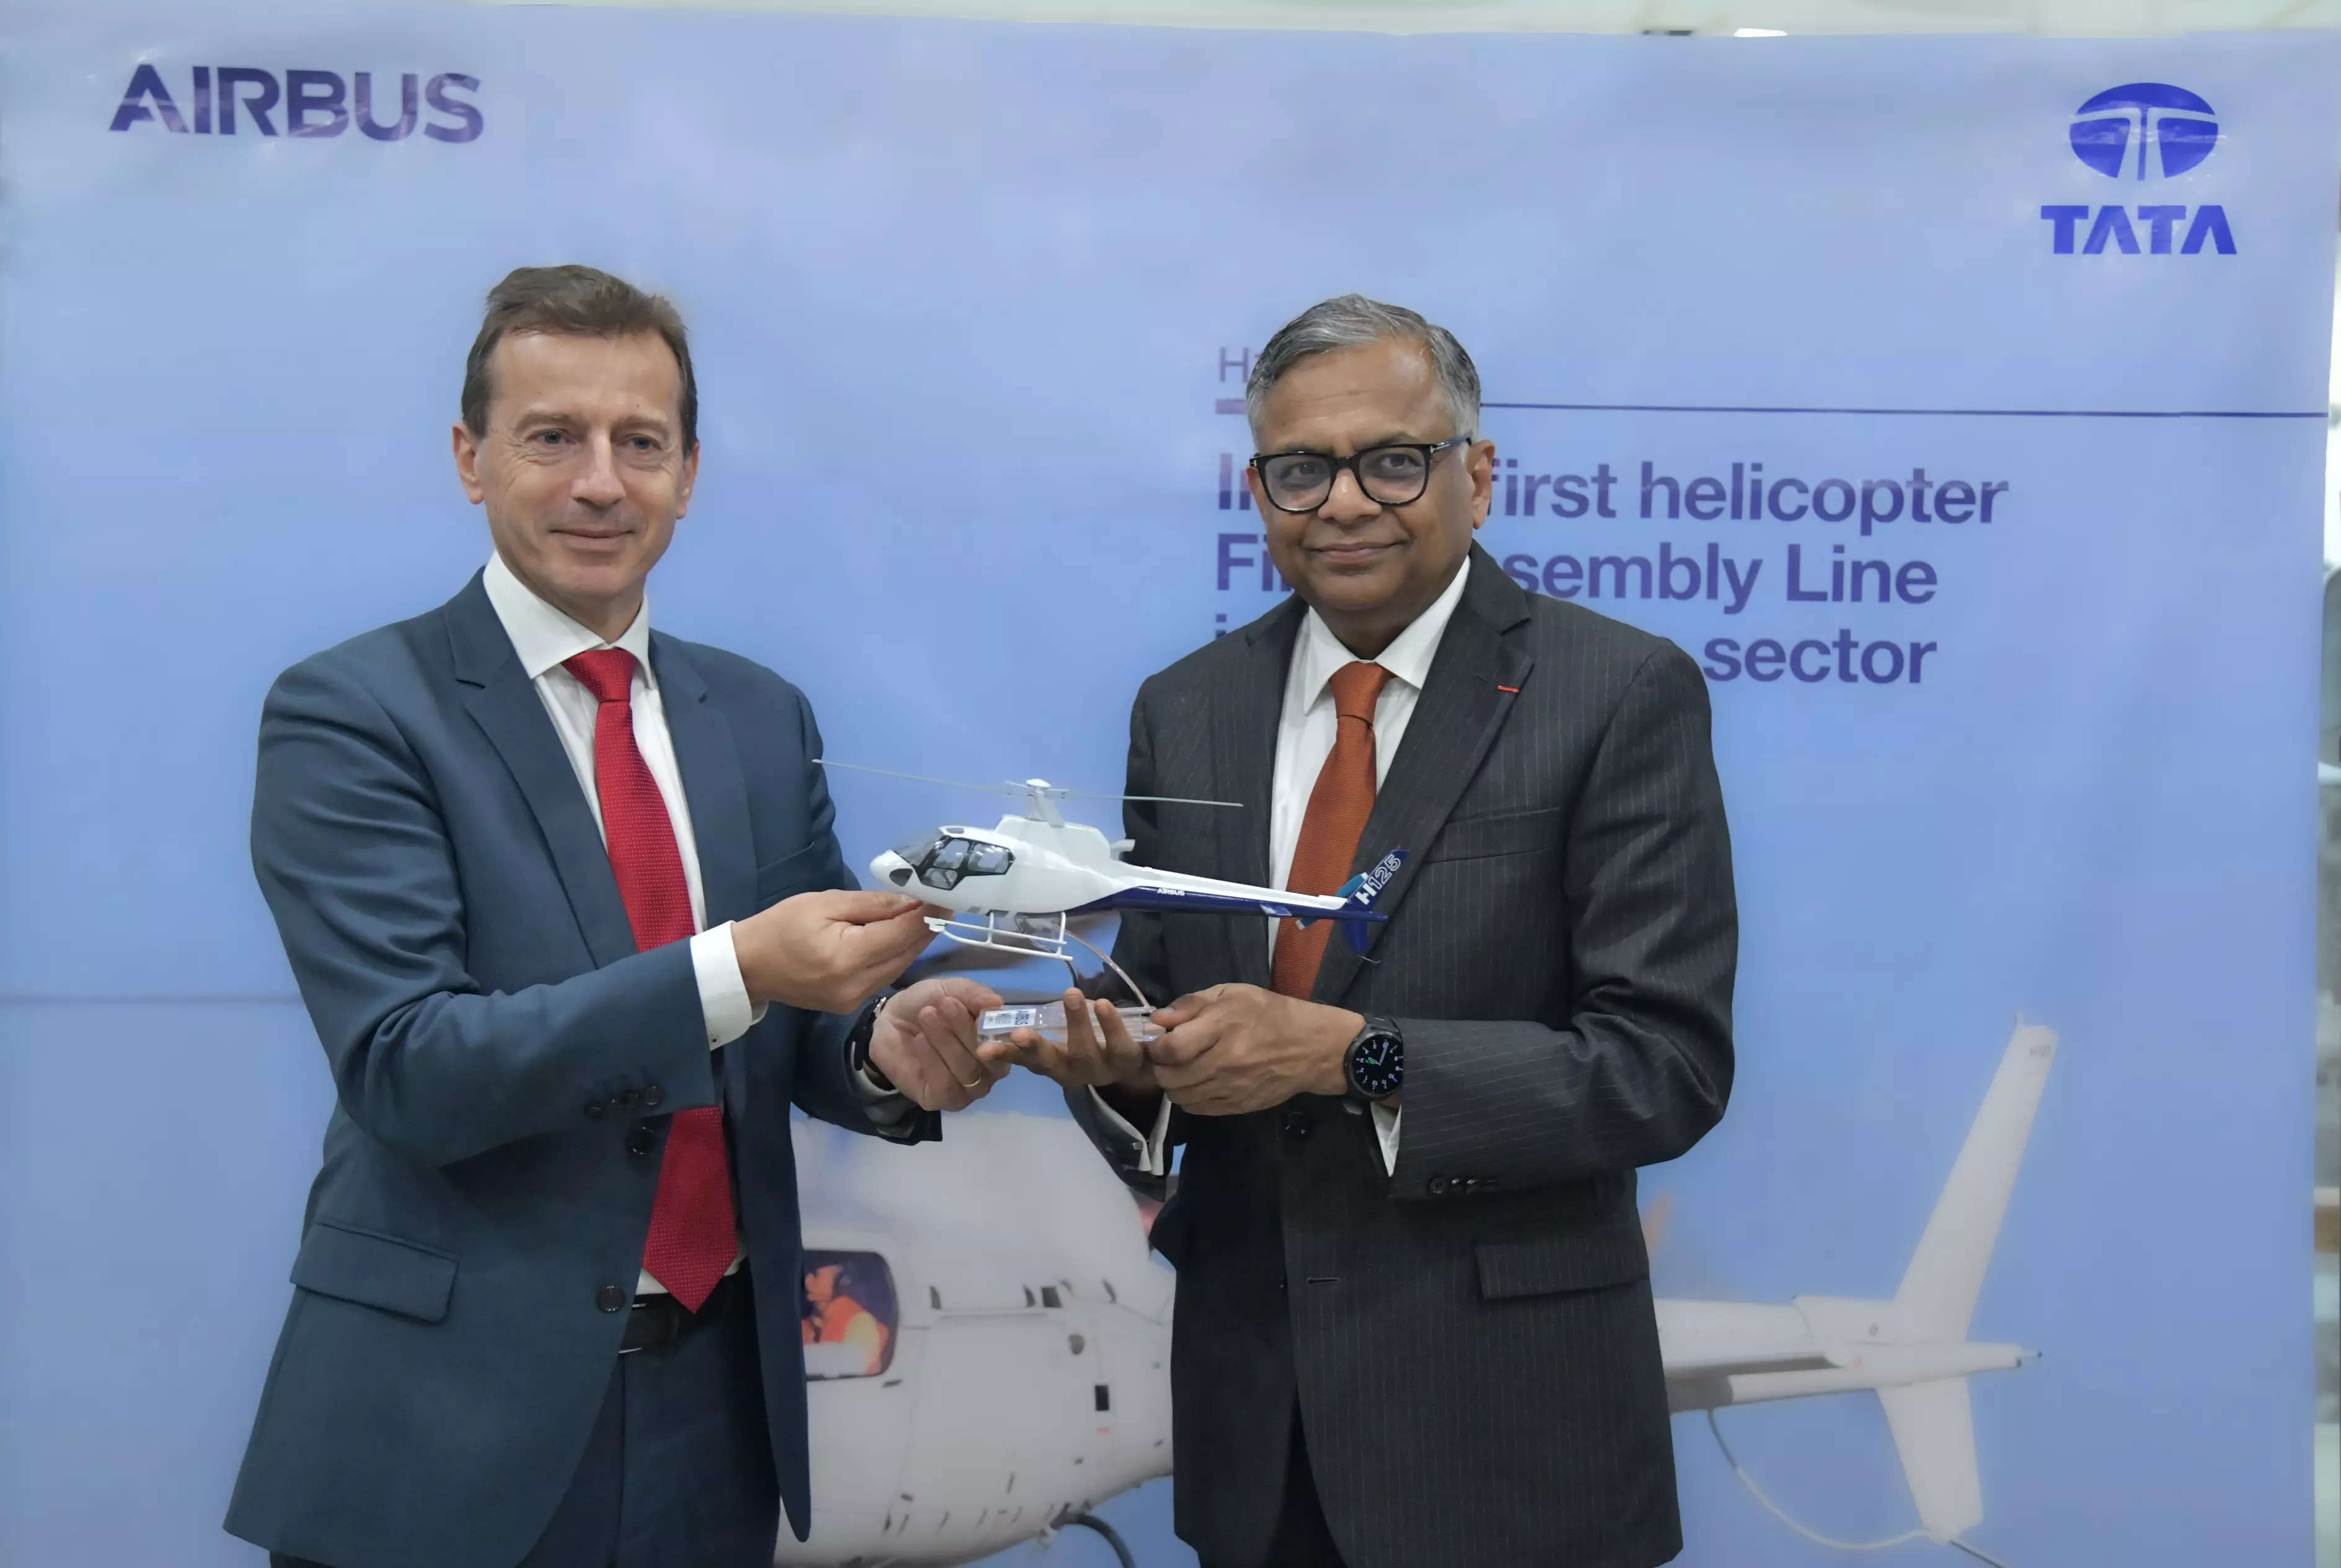 <p>Guillaume Faury, CEO of Airbus, presenting an H125 helicopter model to N. Chandrasekaran, Chairman of <span class="il">Tata</span> Sons, in New Delhi on January 26, 2024. In a major boost to 'Make in India', Airbus Helicopters has announced that it is partnering with the <span class="il">Tata</span> Group to establish a Final Assembly Line (FAL) for helicopters in the country. The FAL will produce Airbus' best-selling H125 helicopter from its civil range for India and export to some of the neighbouring countries.</p>